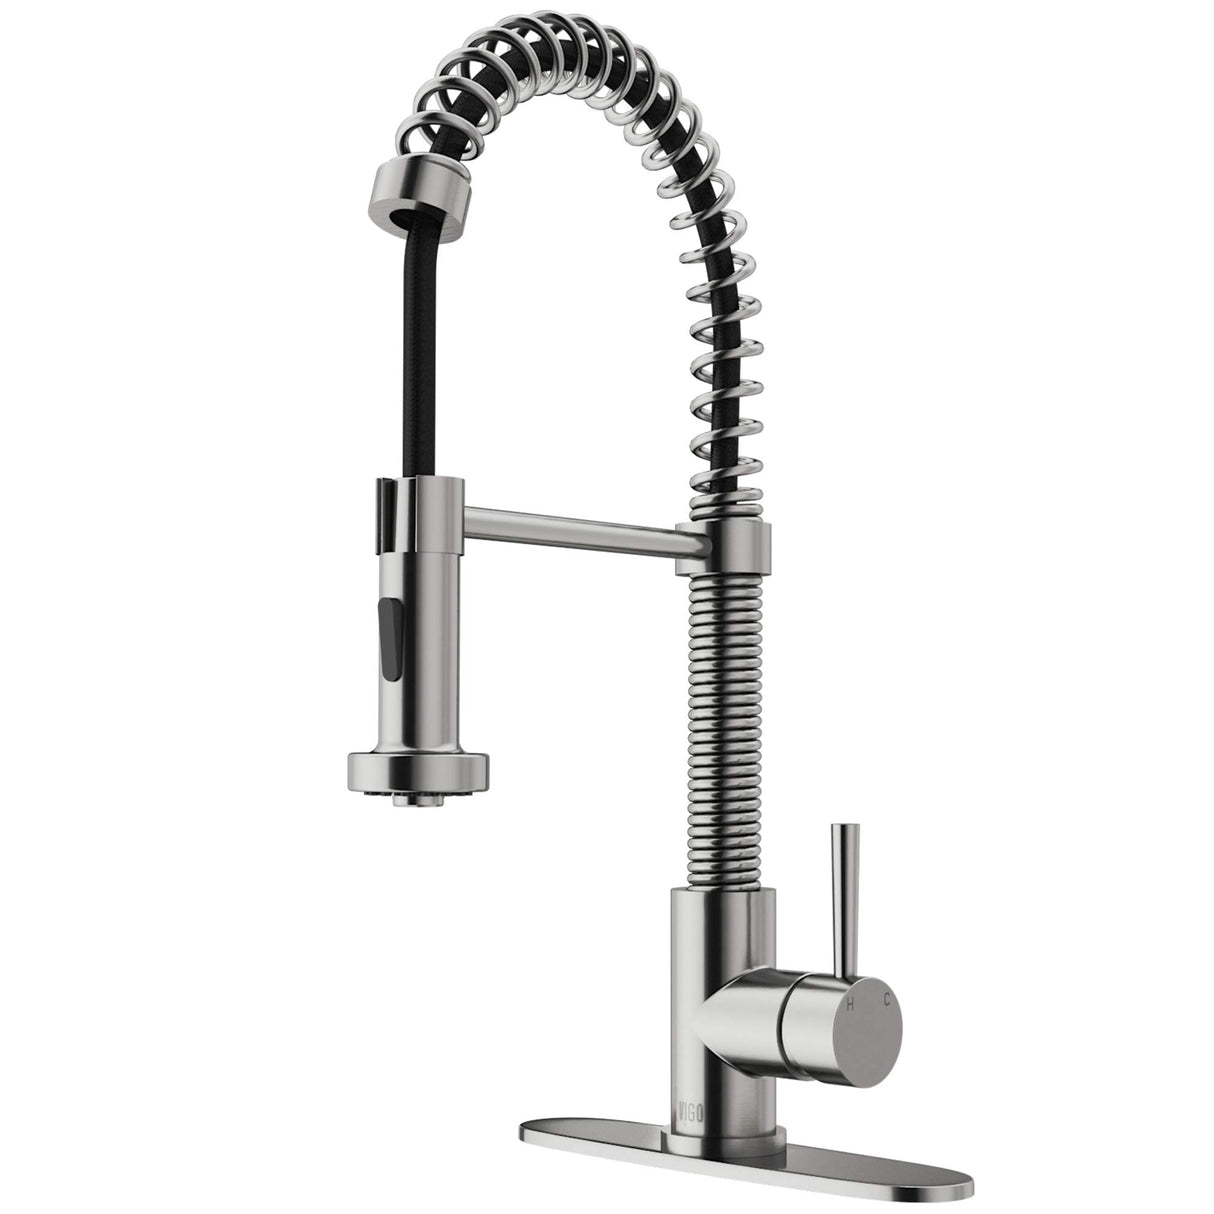 VIGO VG02001STK1 19" H Edison Single-Handle with Pull-Down Sprayer Kitchen Faucet with Deck Plate in Stainless Steel